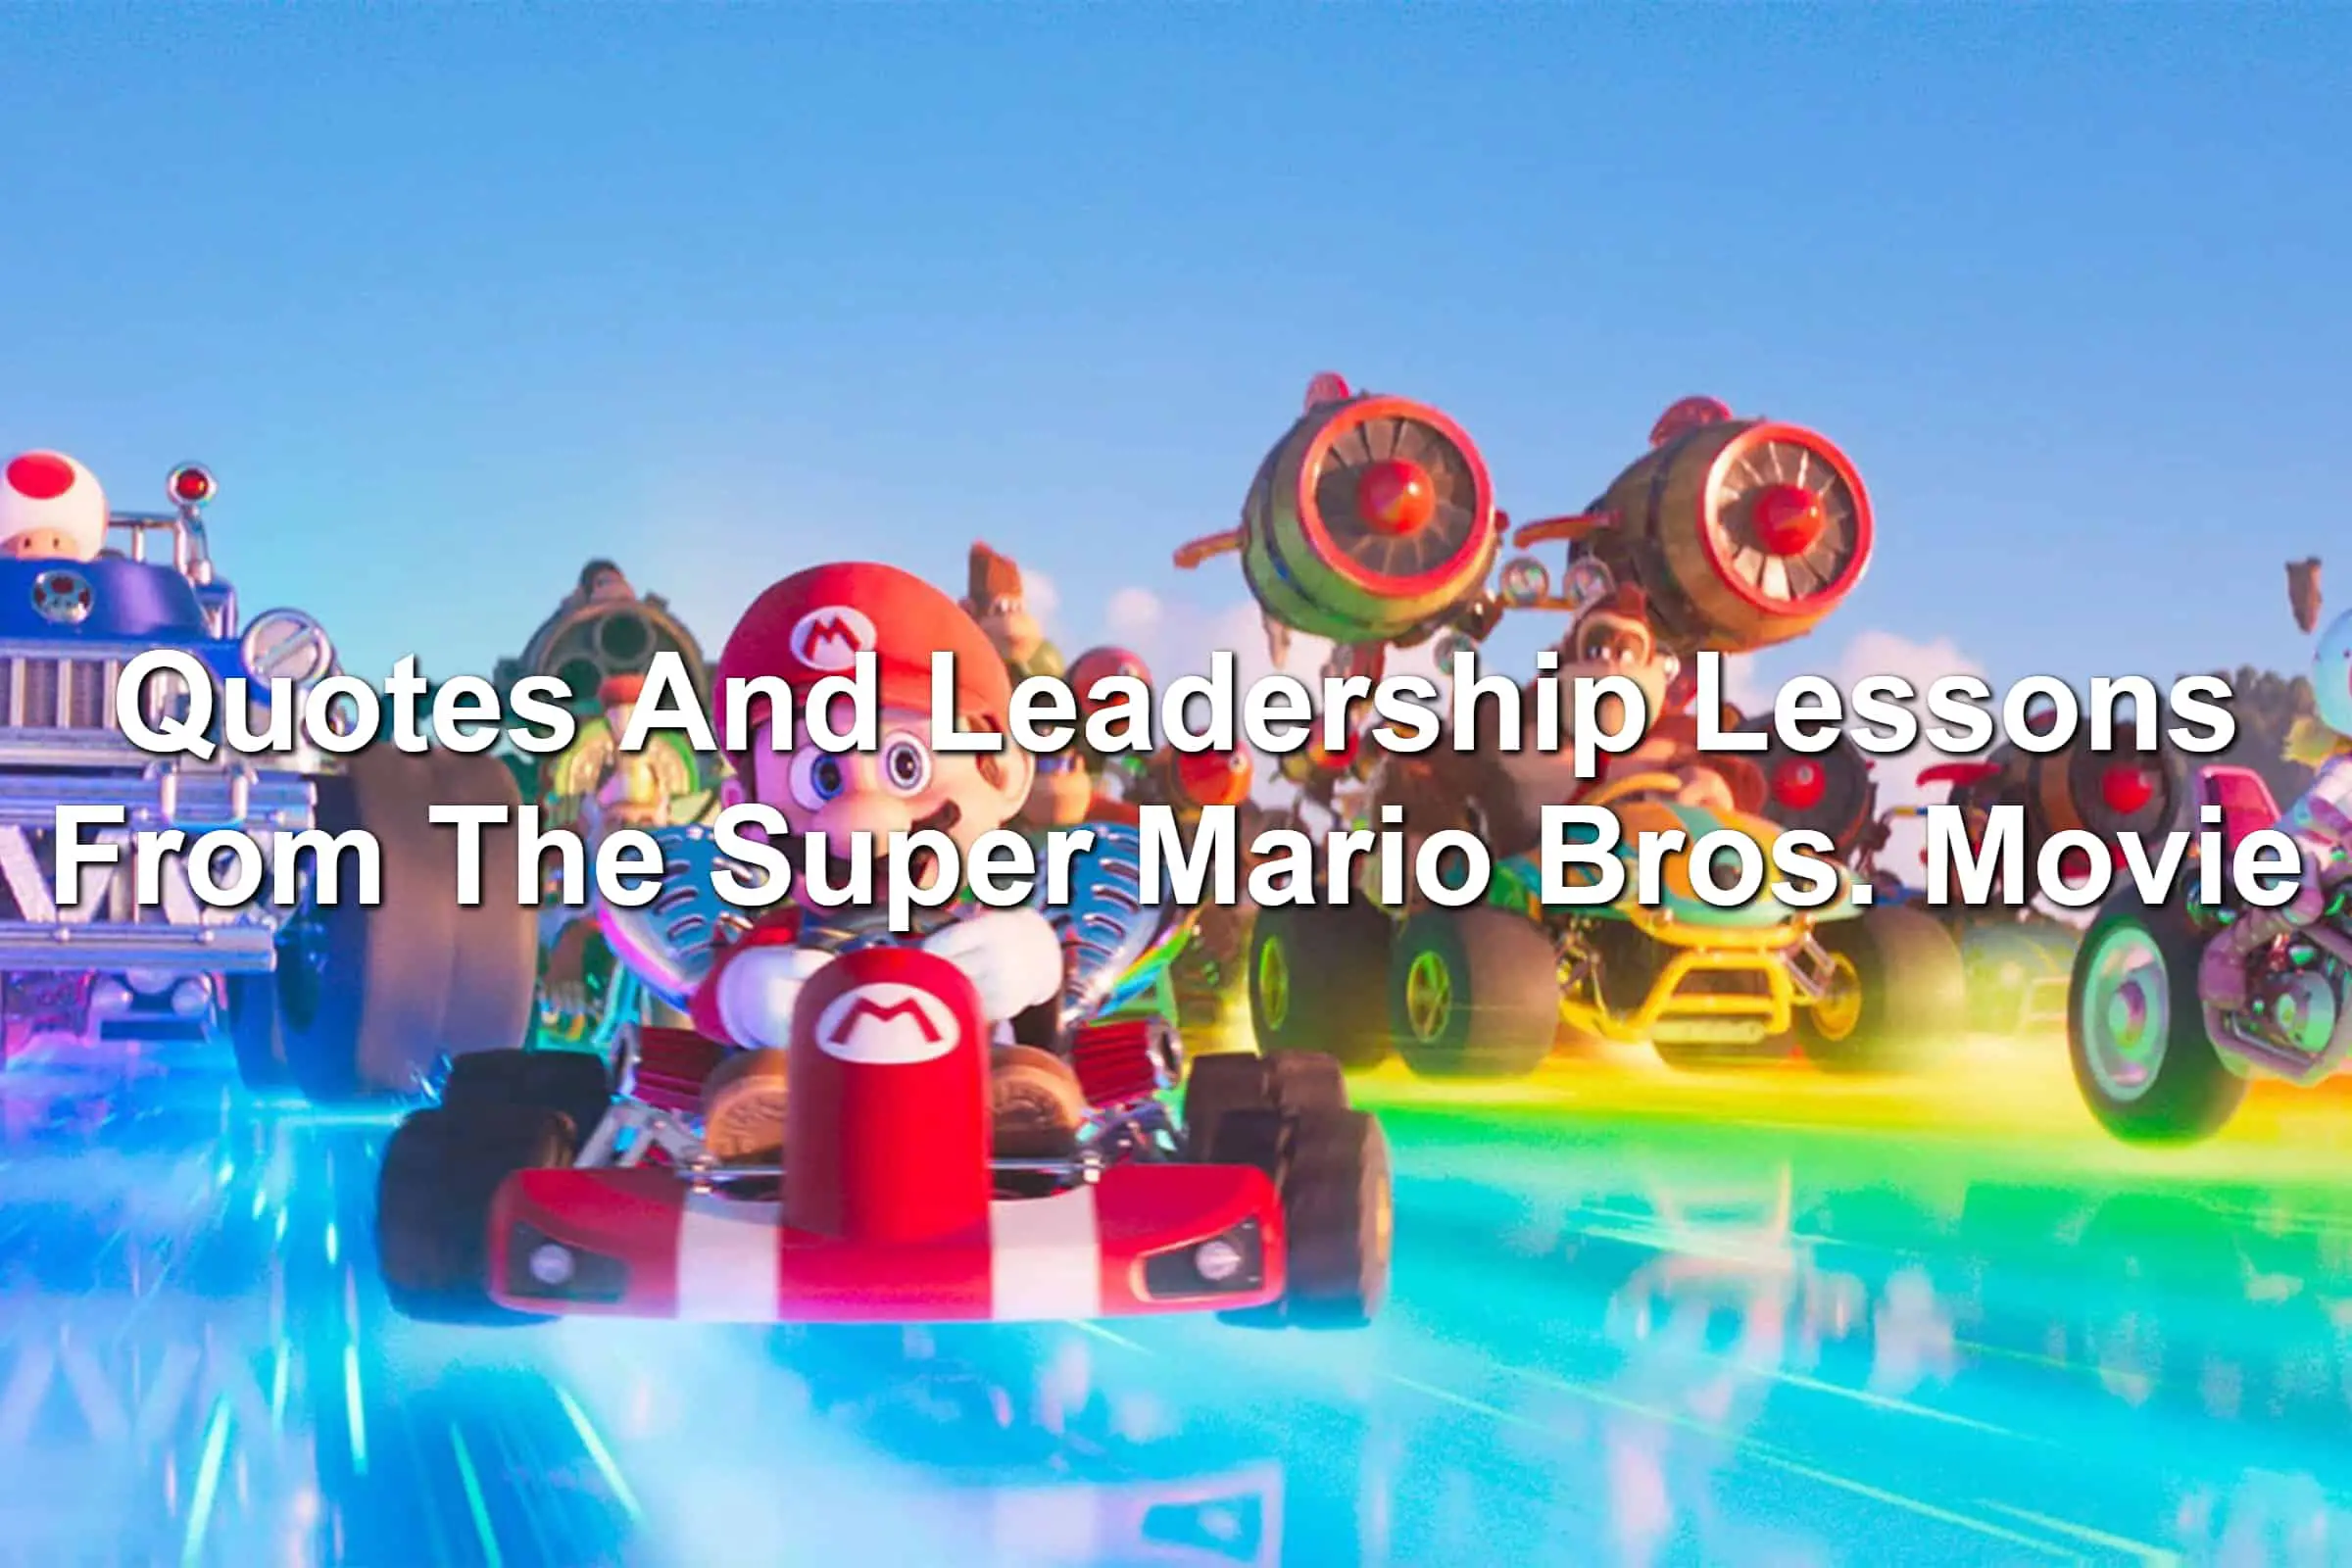 Scene from The Super Marion Bros. Movie. Heroes of the movie including Mario, Toad, and Donkey Kong in Mario Kart vehicles on Rainbow Bridge.